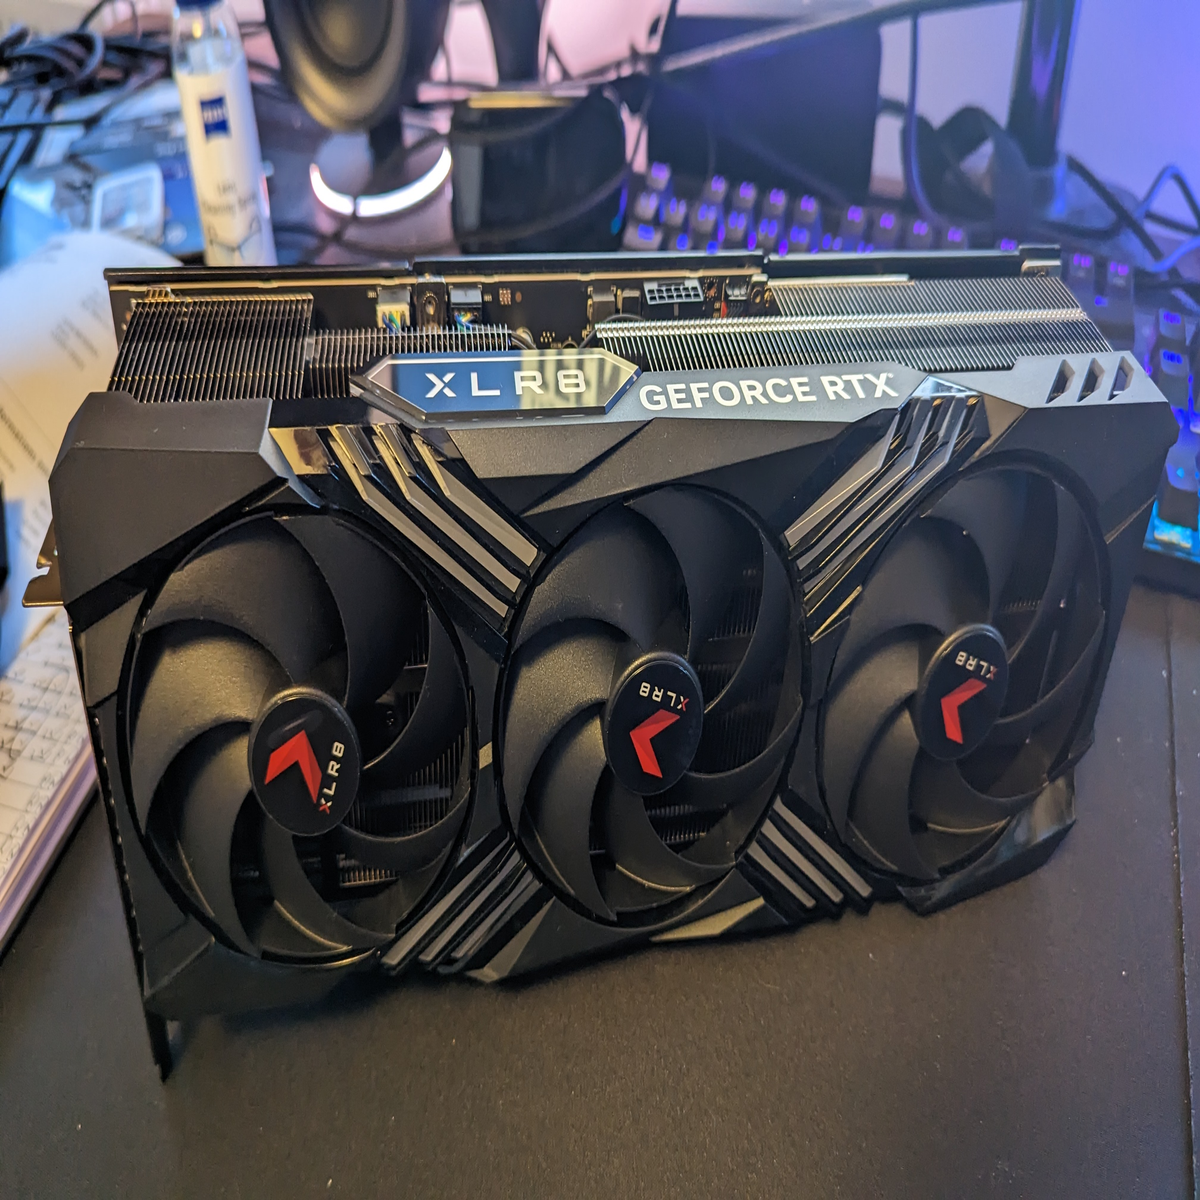 PNY RTX 4080 XLR8 review: is this a worthwhile upgrade from RTX 3080?